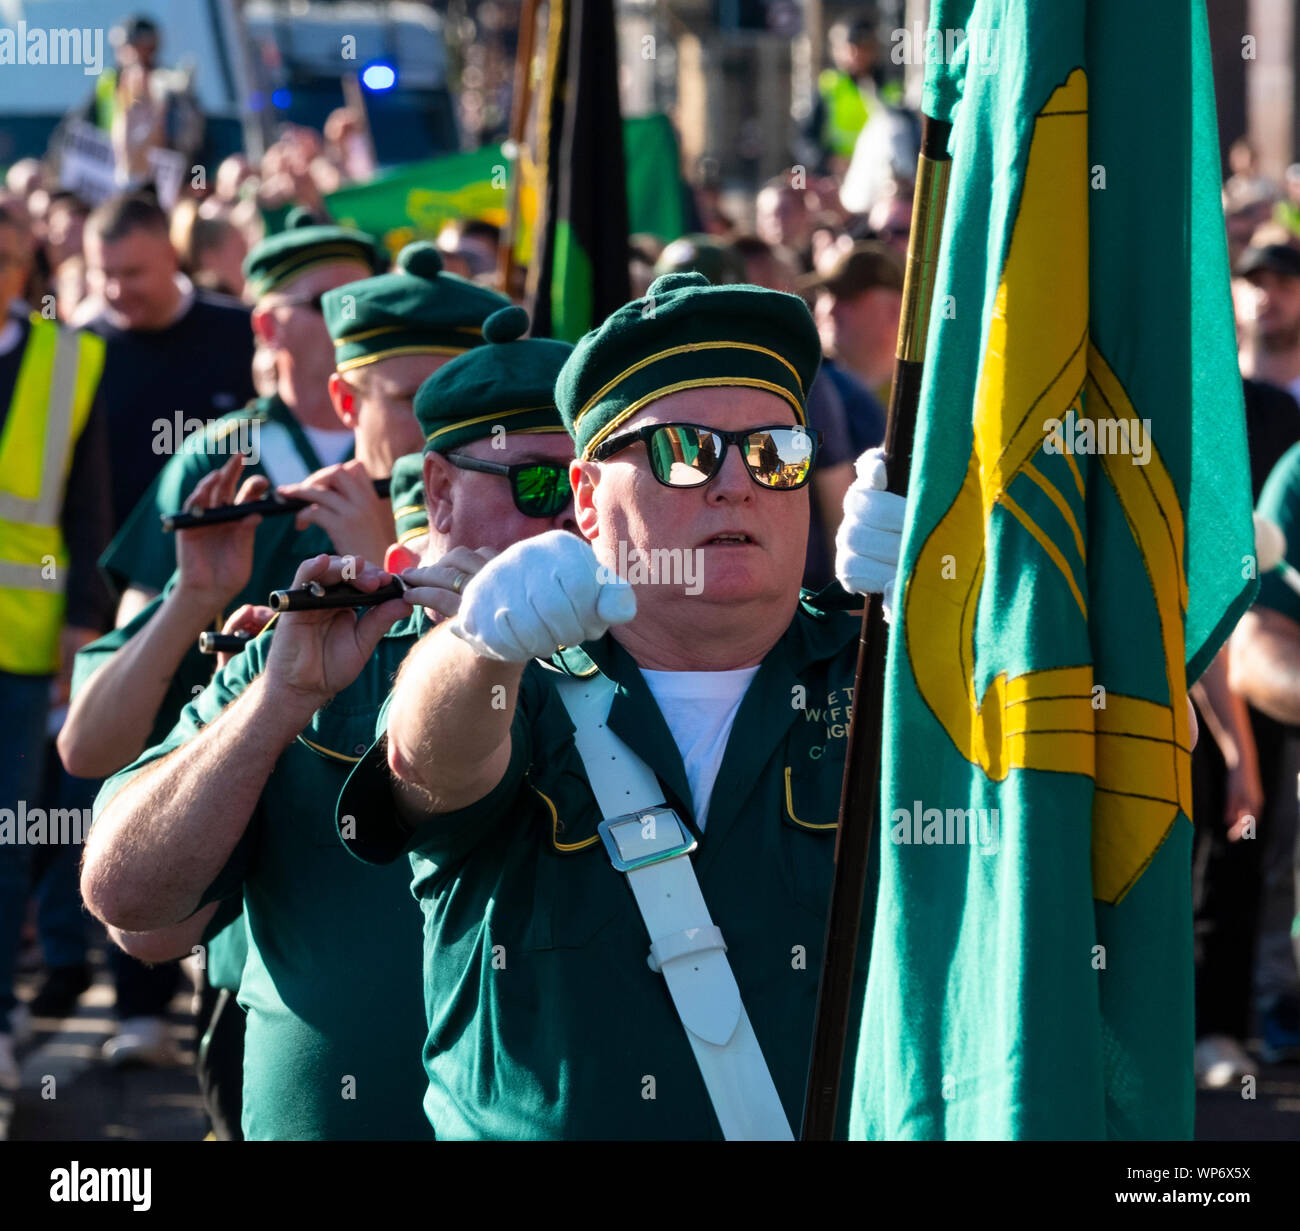 Glasgow, Scotland, UK. 7th Sep, 2019. Second controversial march in Glasgow march this time by IRPWA. The Irish Republican Prisoners Welfare Association is a dissident republican organisation which supports republican prisoners. It has ties with the political party Saoradh and the 32 County Sovereignty Movement. Credit: Iain Masterton/Alamy Live News Stock Photo